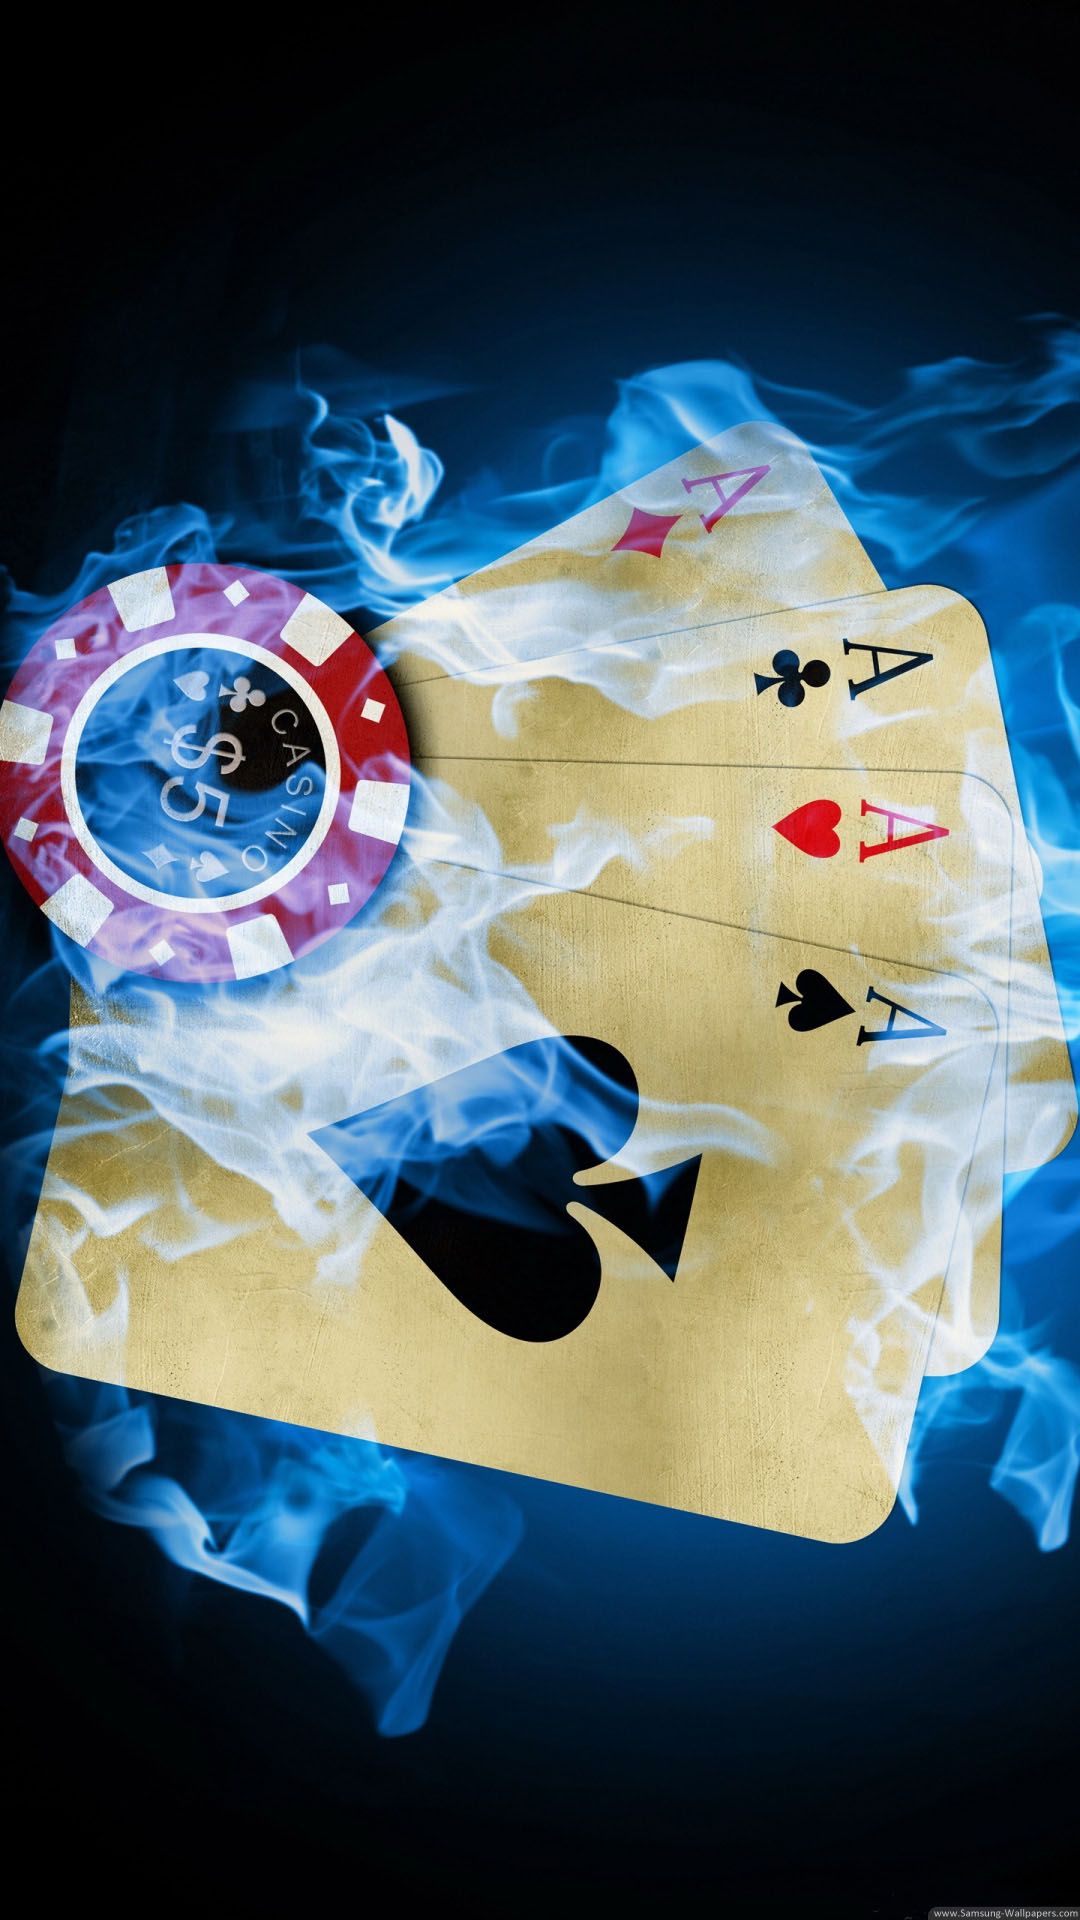 Poker cardsK wallpaper, free and easy to download